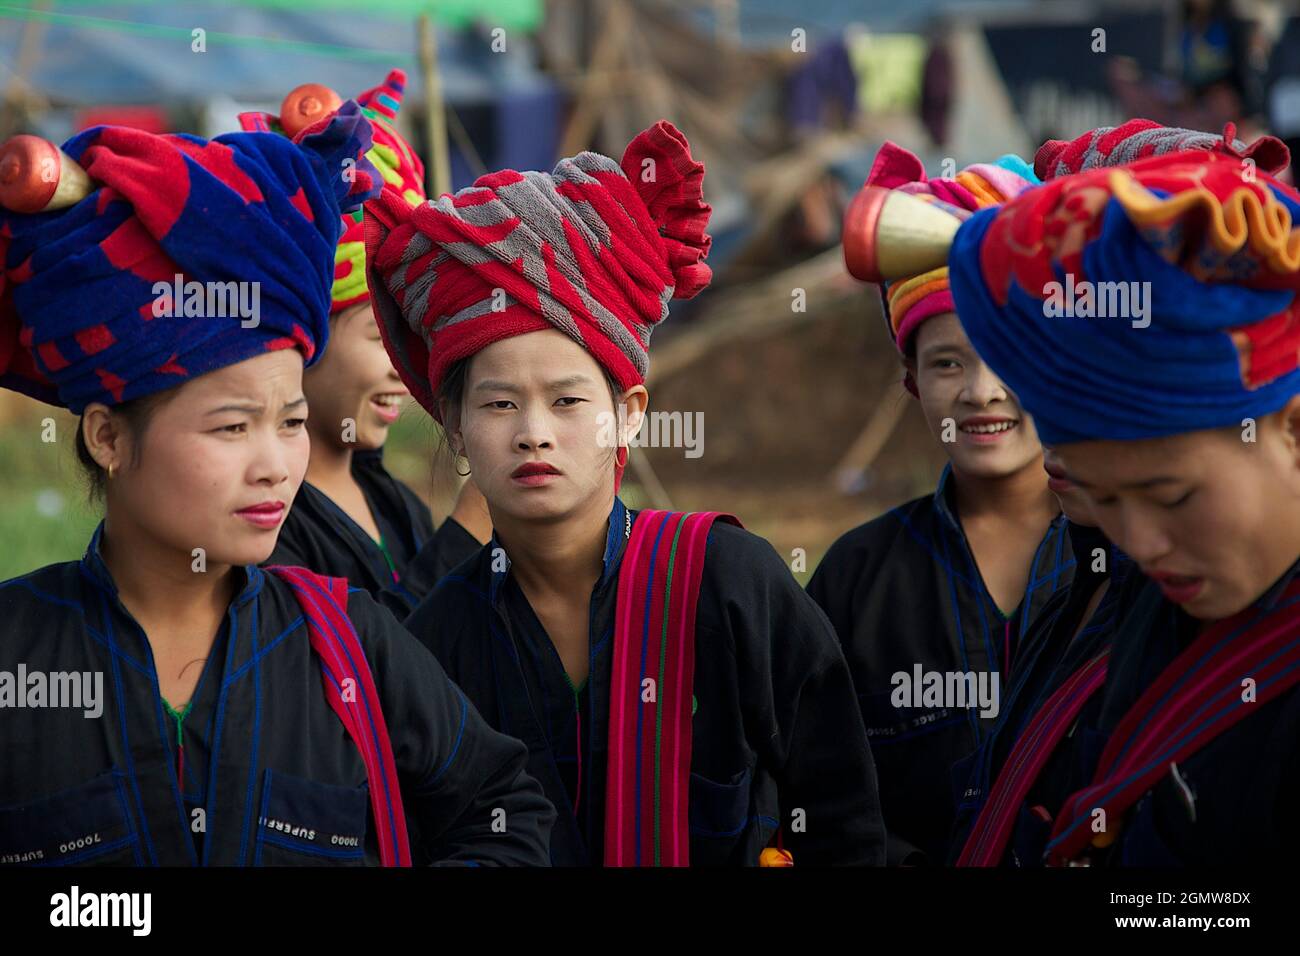 MYANMAR (BURMA). SHAN STATE. GROUP OF BUDDHIST WOMAN WEARINF TRADITIONAL COSTUME AND TURBAN AND WITH THANAKA ON HER FACE (COSMETIC PASTE OF VEGETABLE Stock Photo